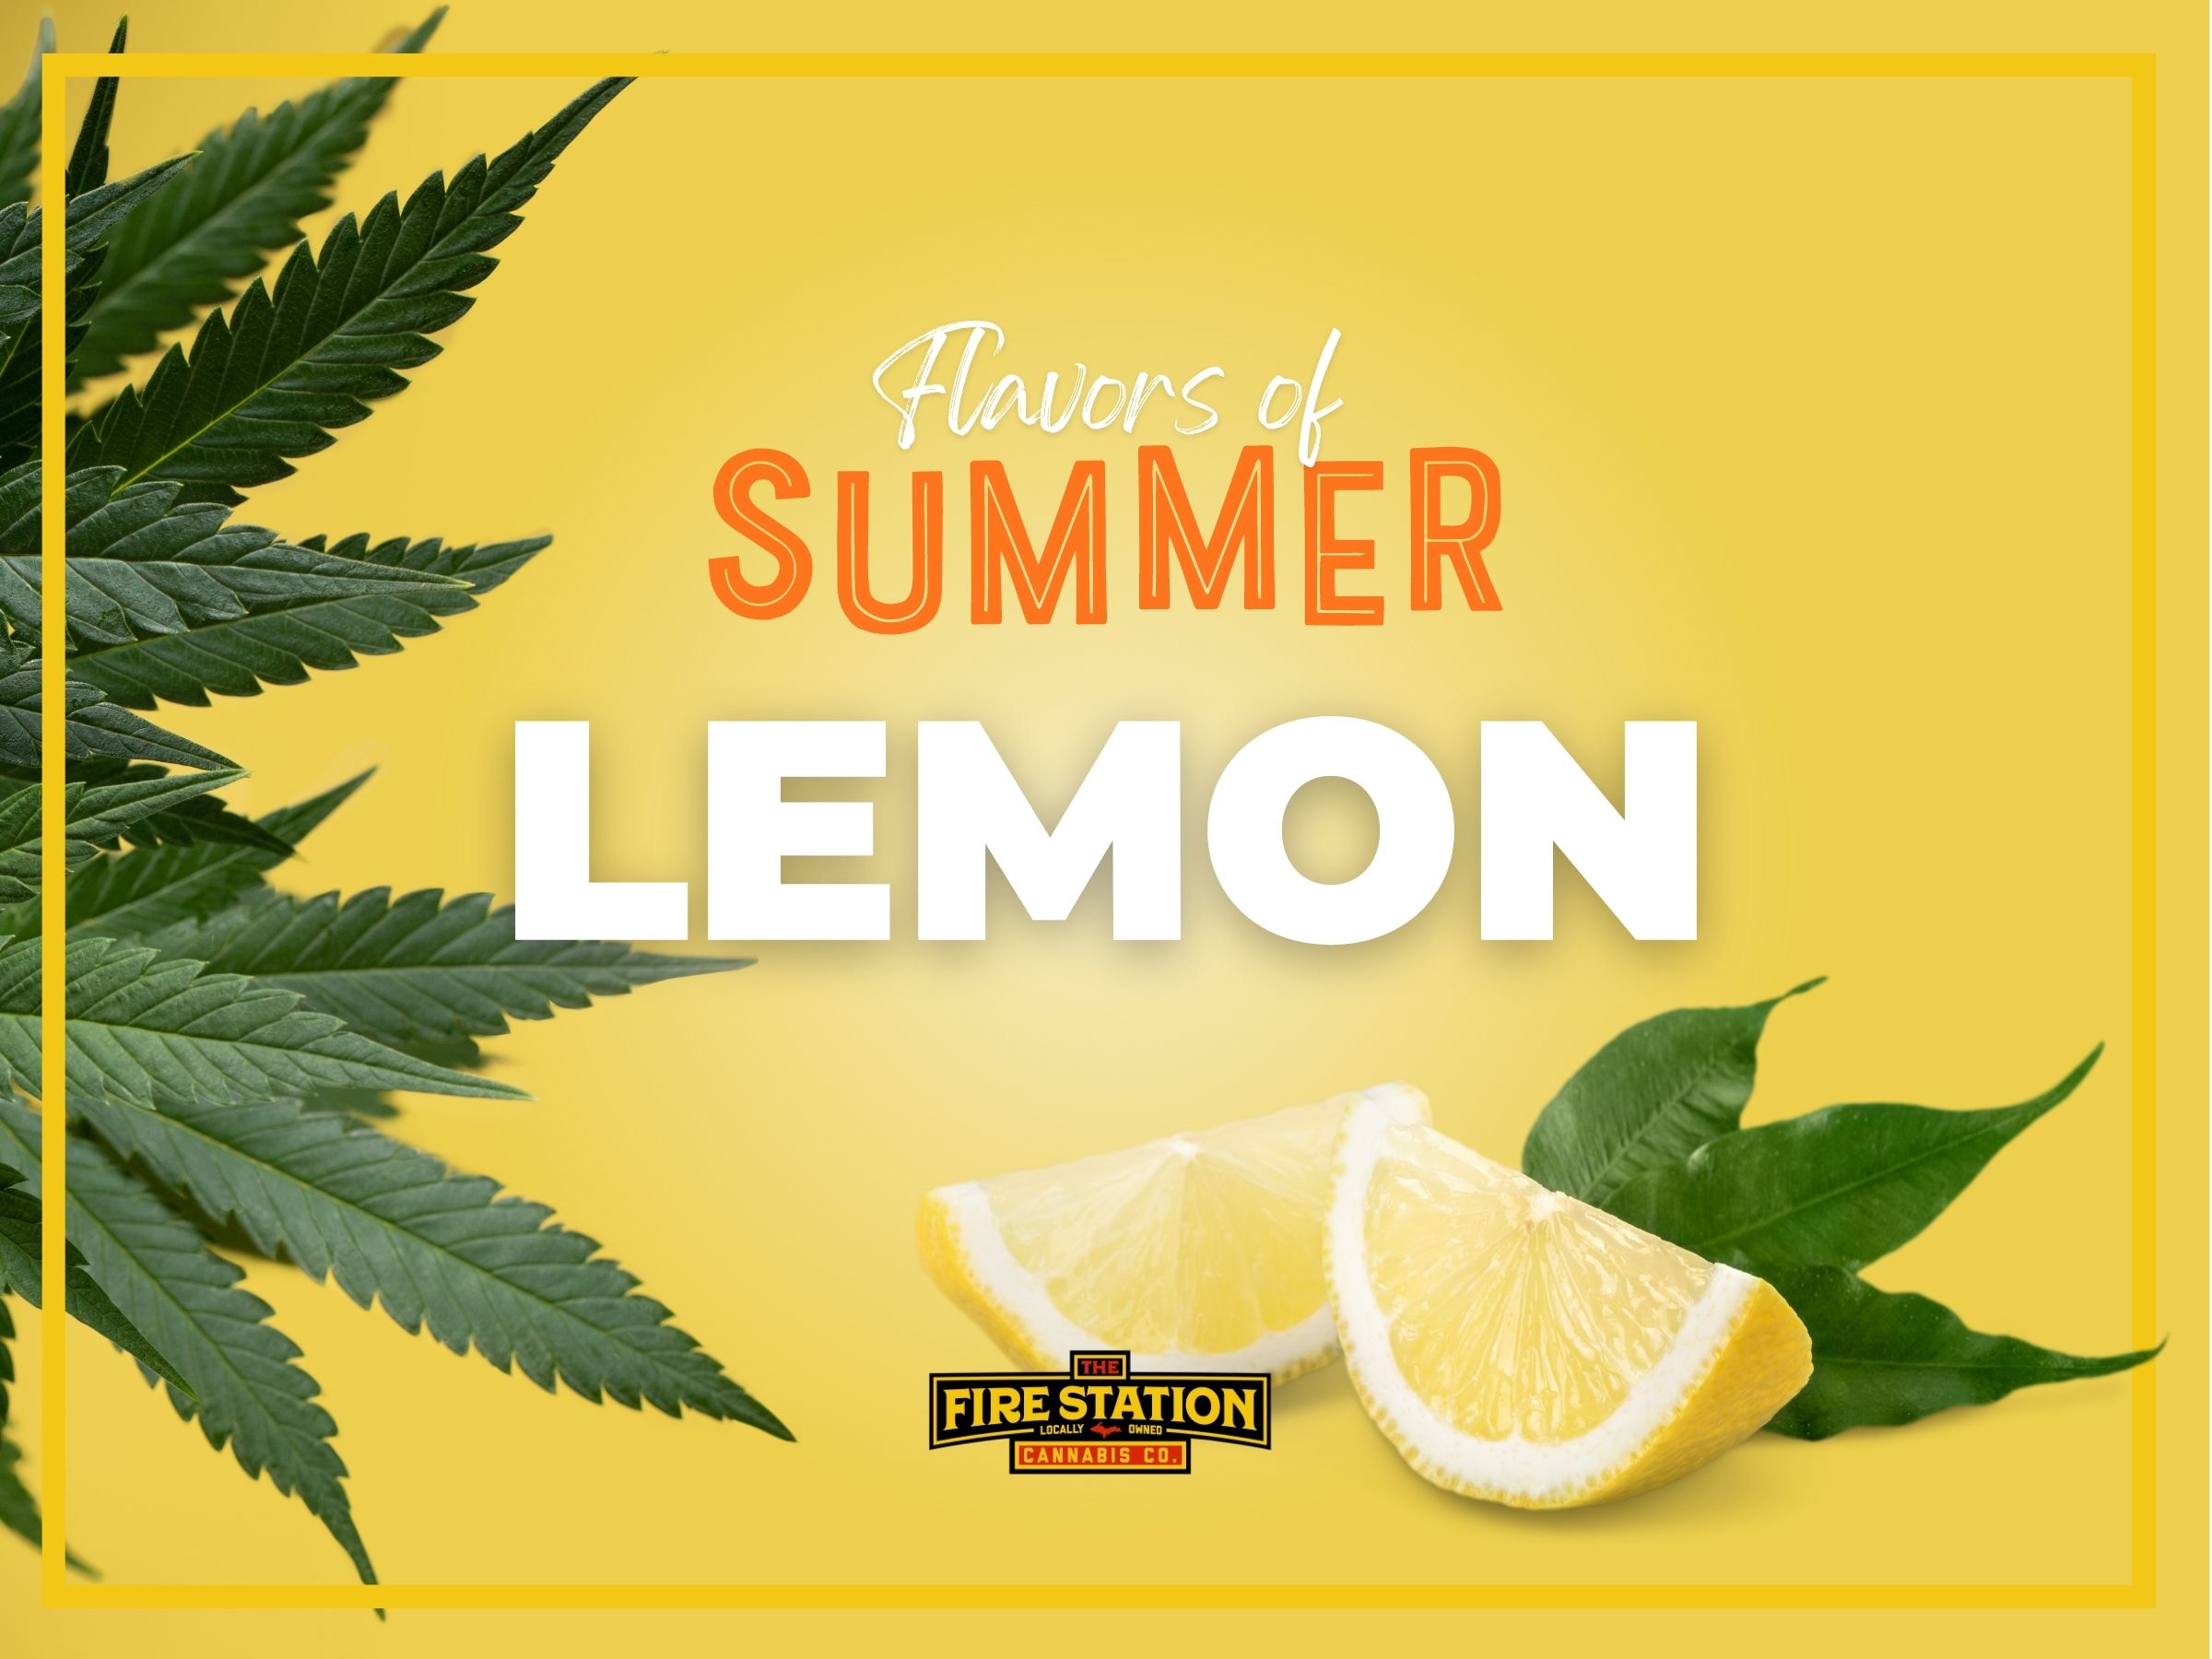 Flavors of Summer Sale at The Fire Station Cannabis Company: Lemon